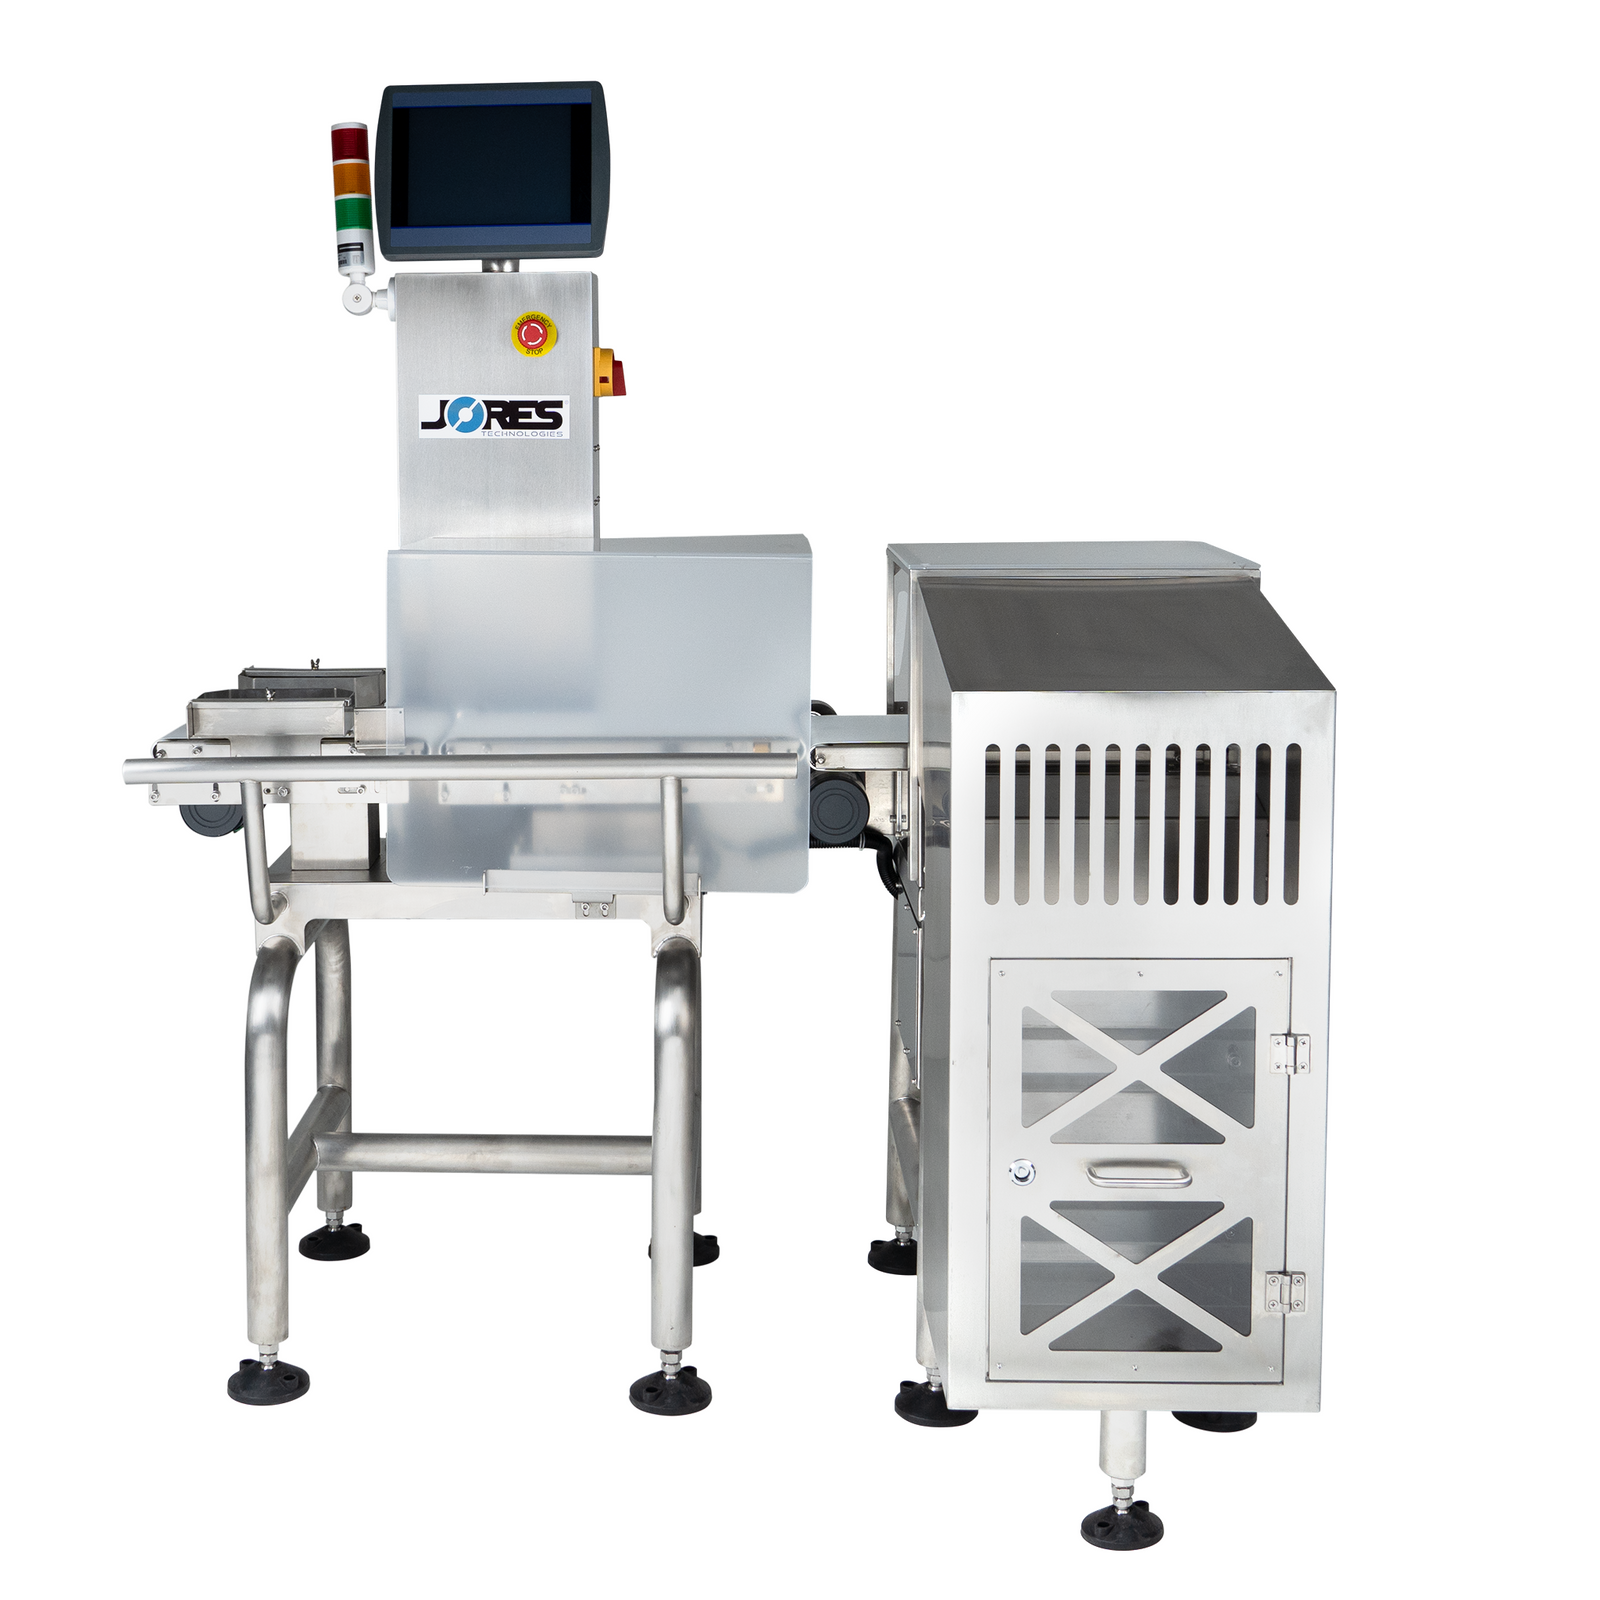 Automatic digital check weigher up to 6.6lbs